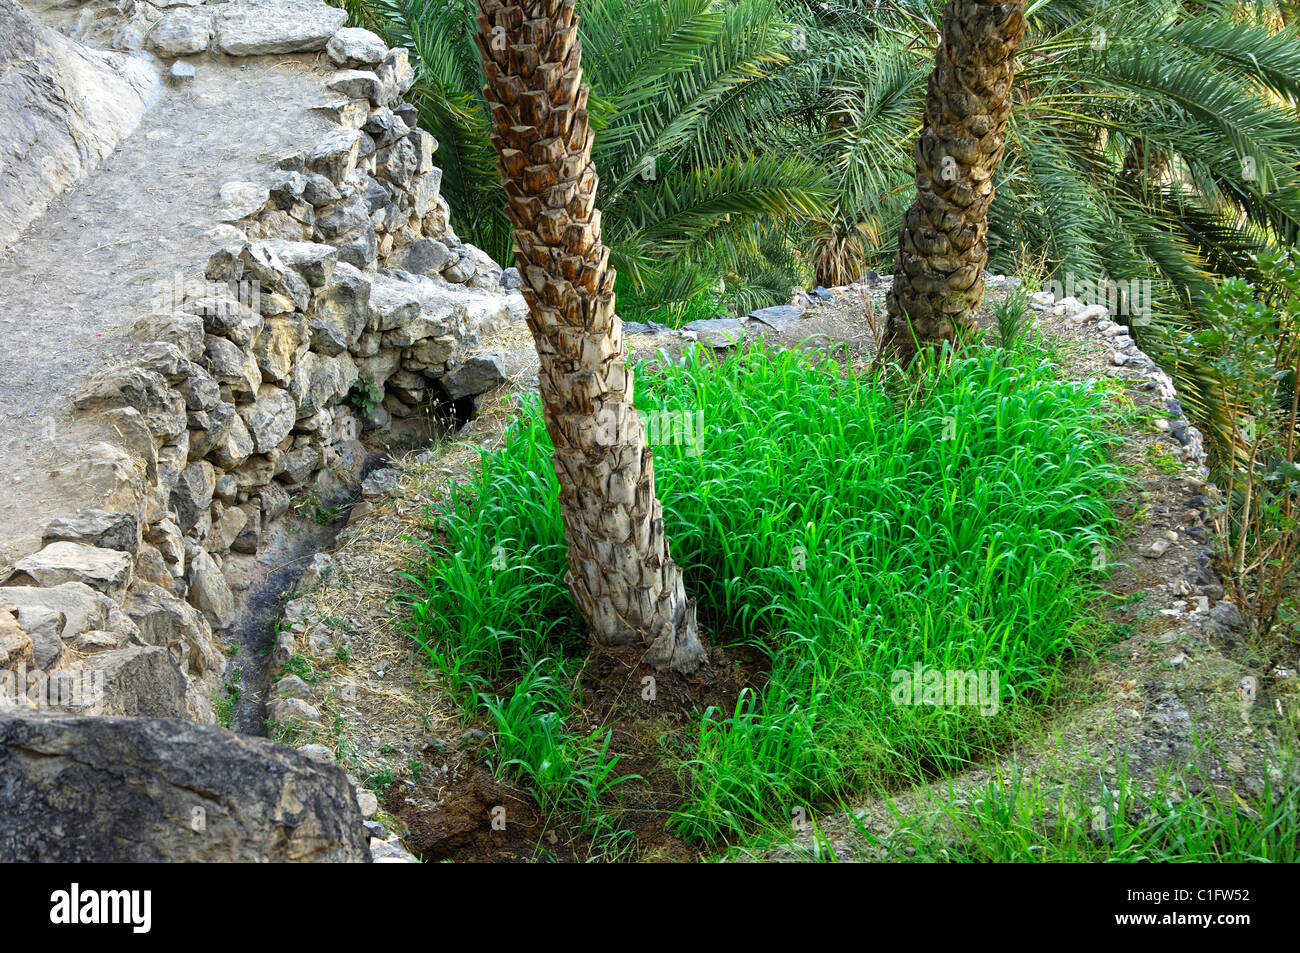 Micro plots for cereals under irrigated date palm trees, Misfah al-Ibriyeen, Sultanate of Oman Stock Photo